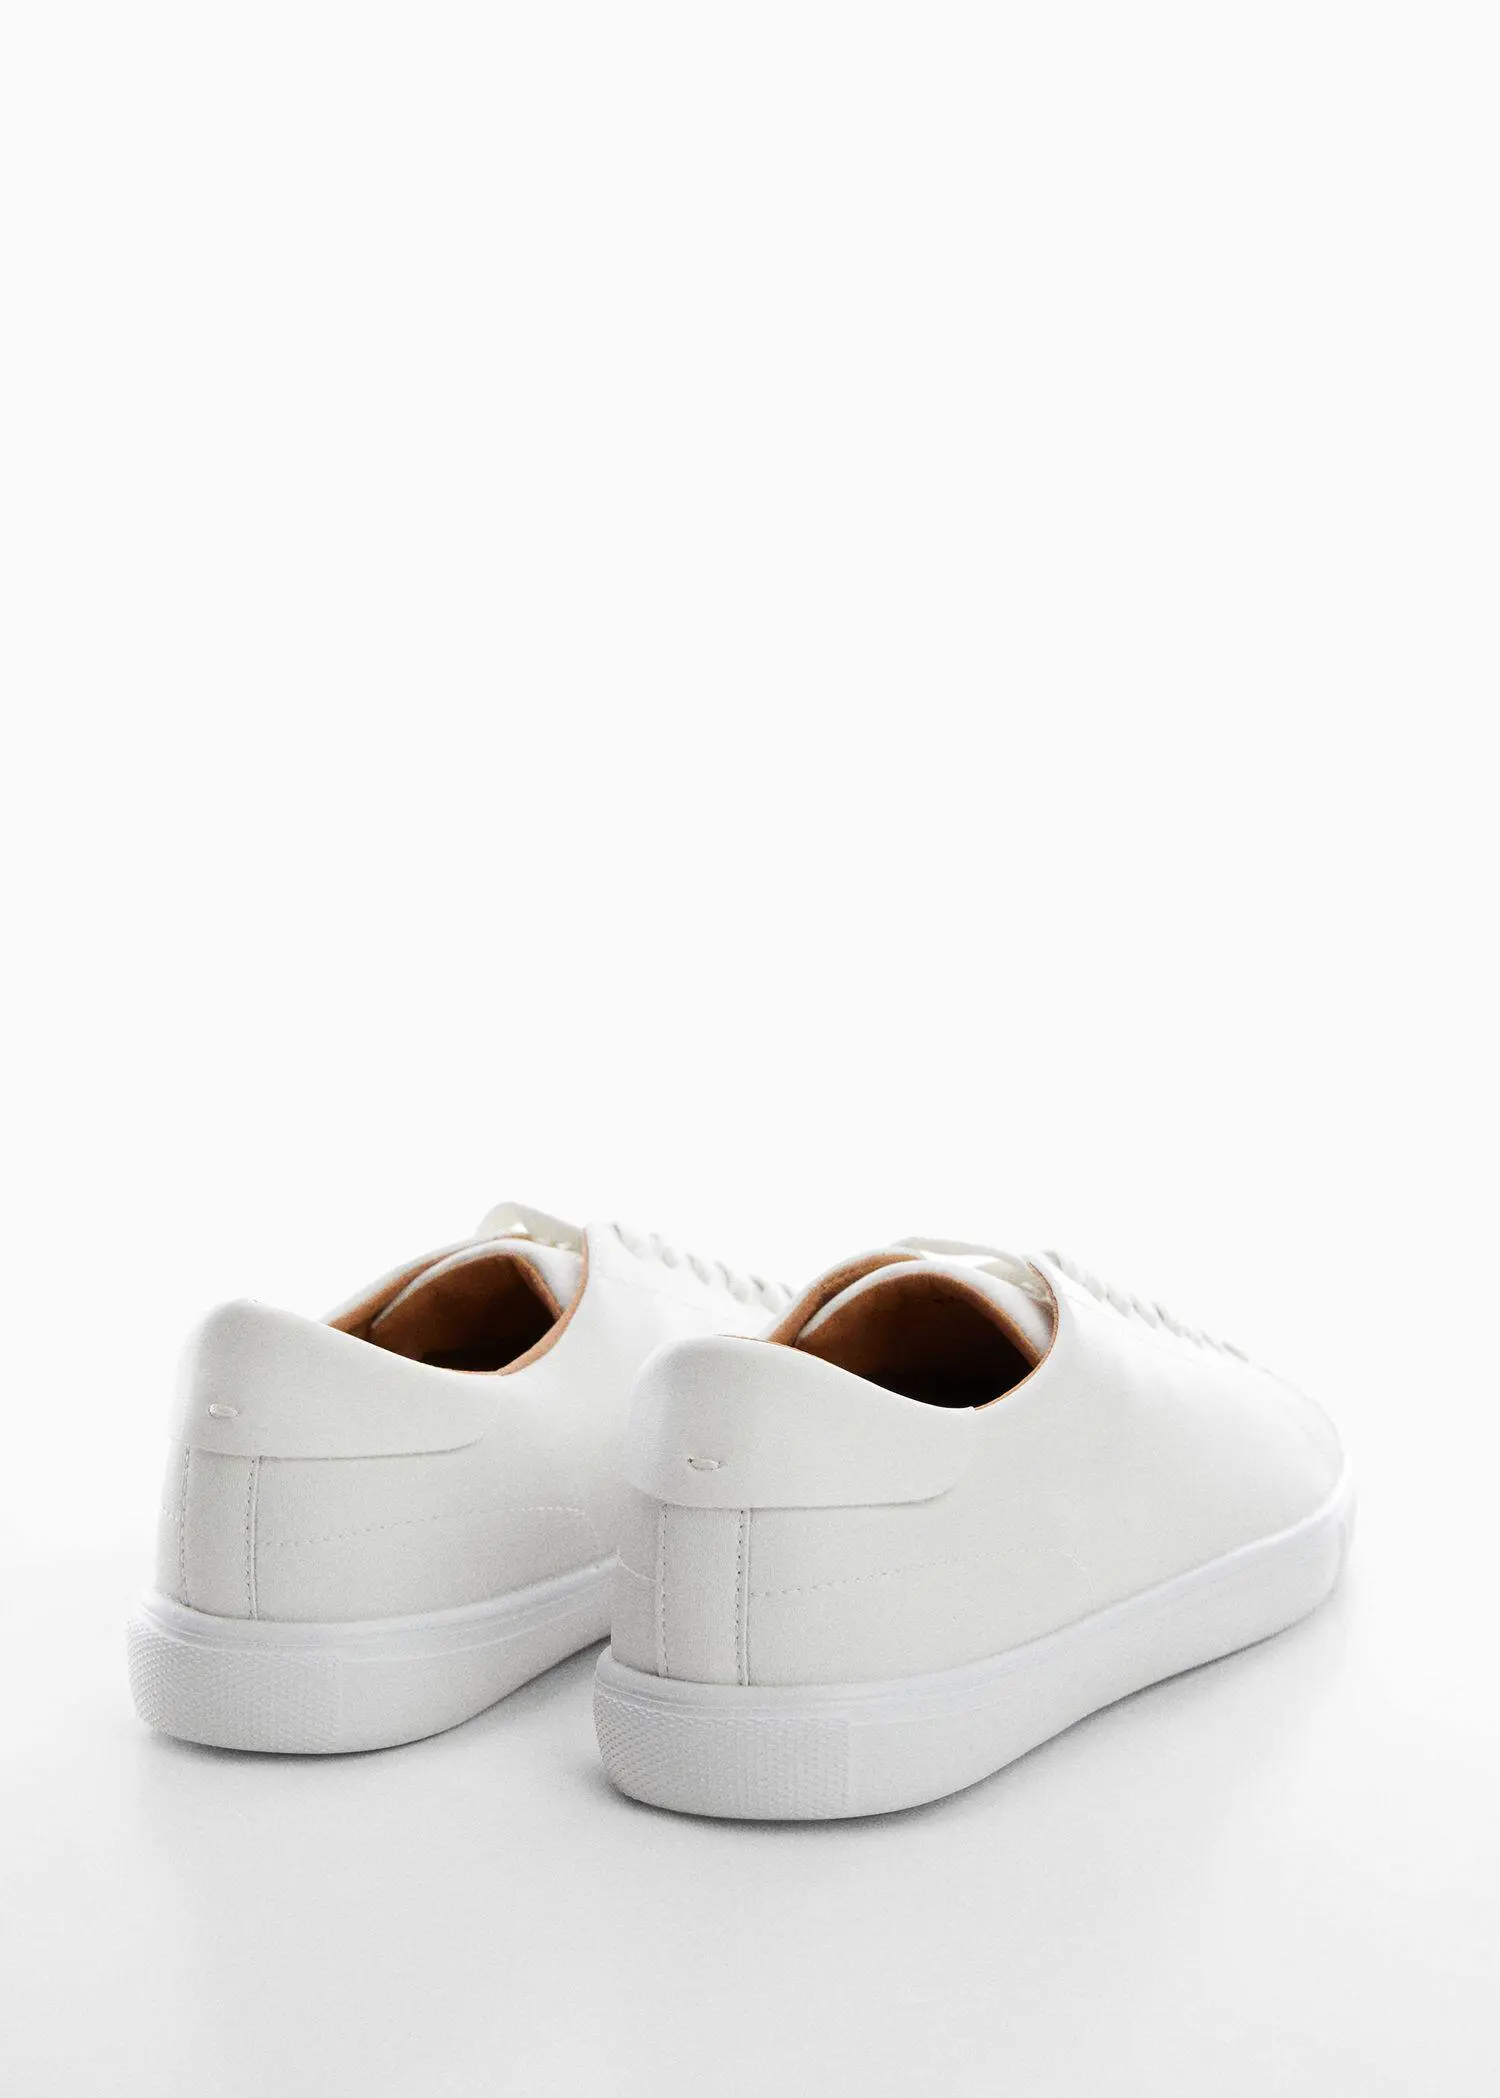 Mango Noncolored leather sneakers. a pair of white sneakers on a white surface. 